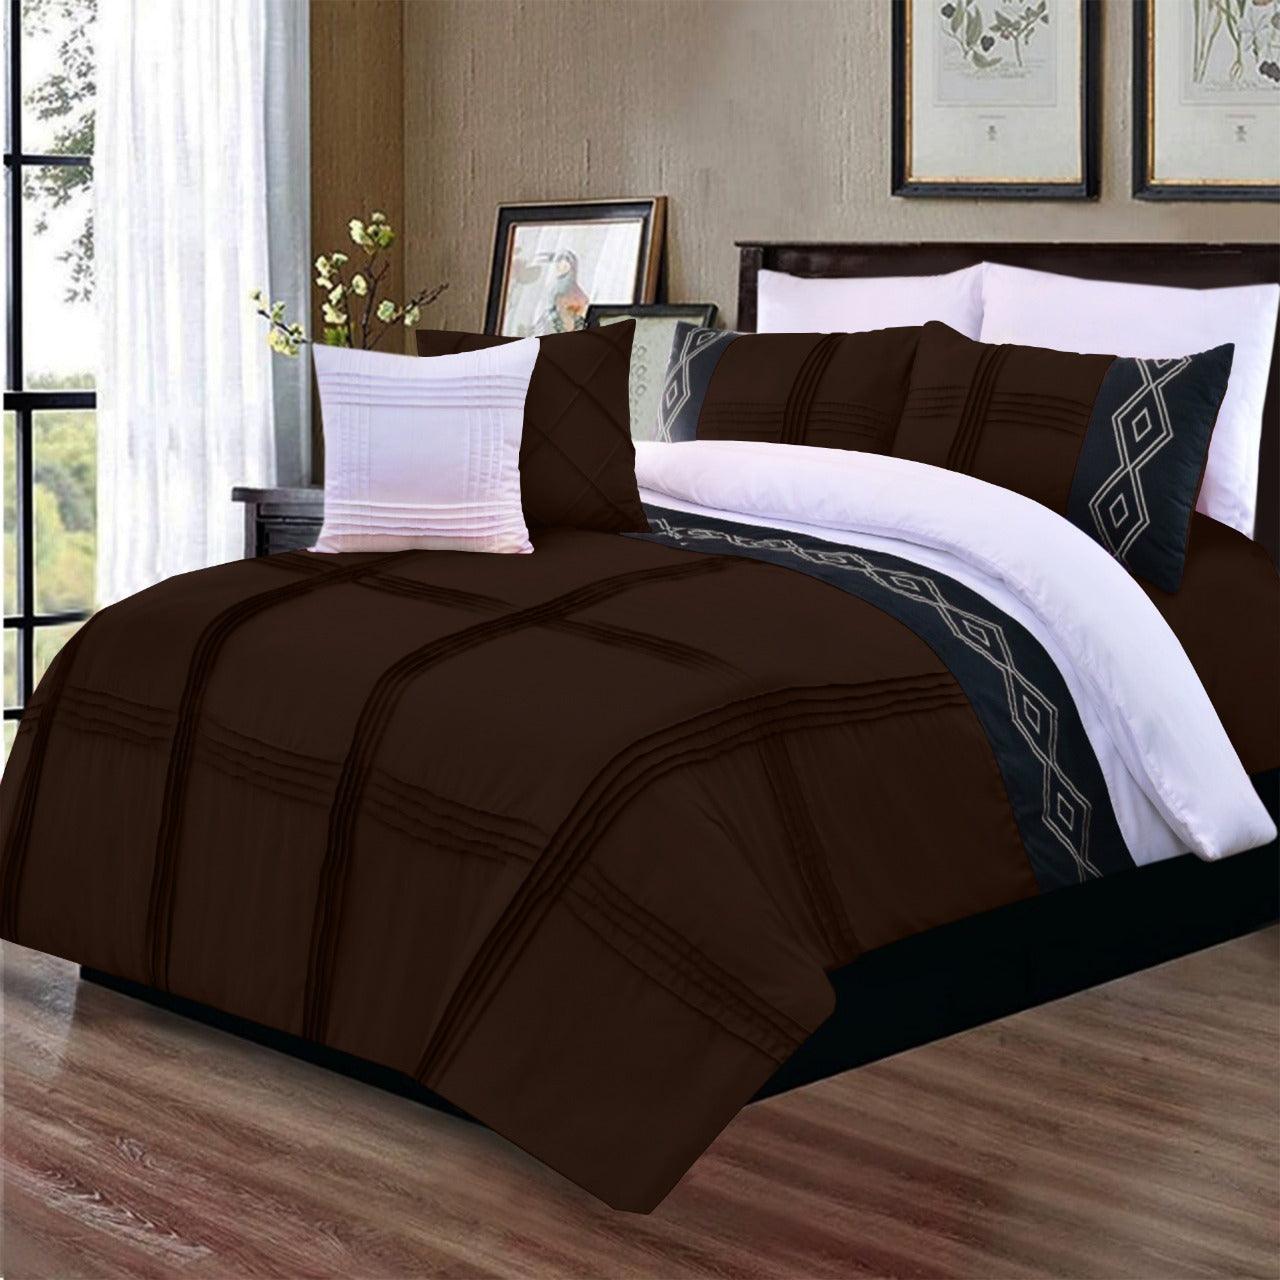 8 Pcs Pleated Embroidered Duvet Set Brown - 92Bedding